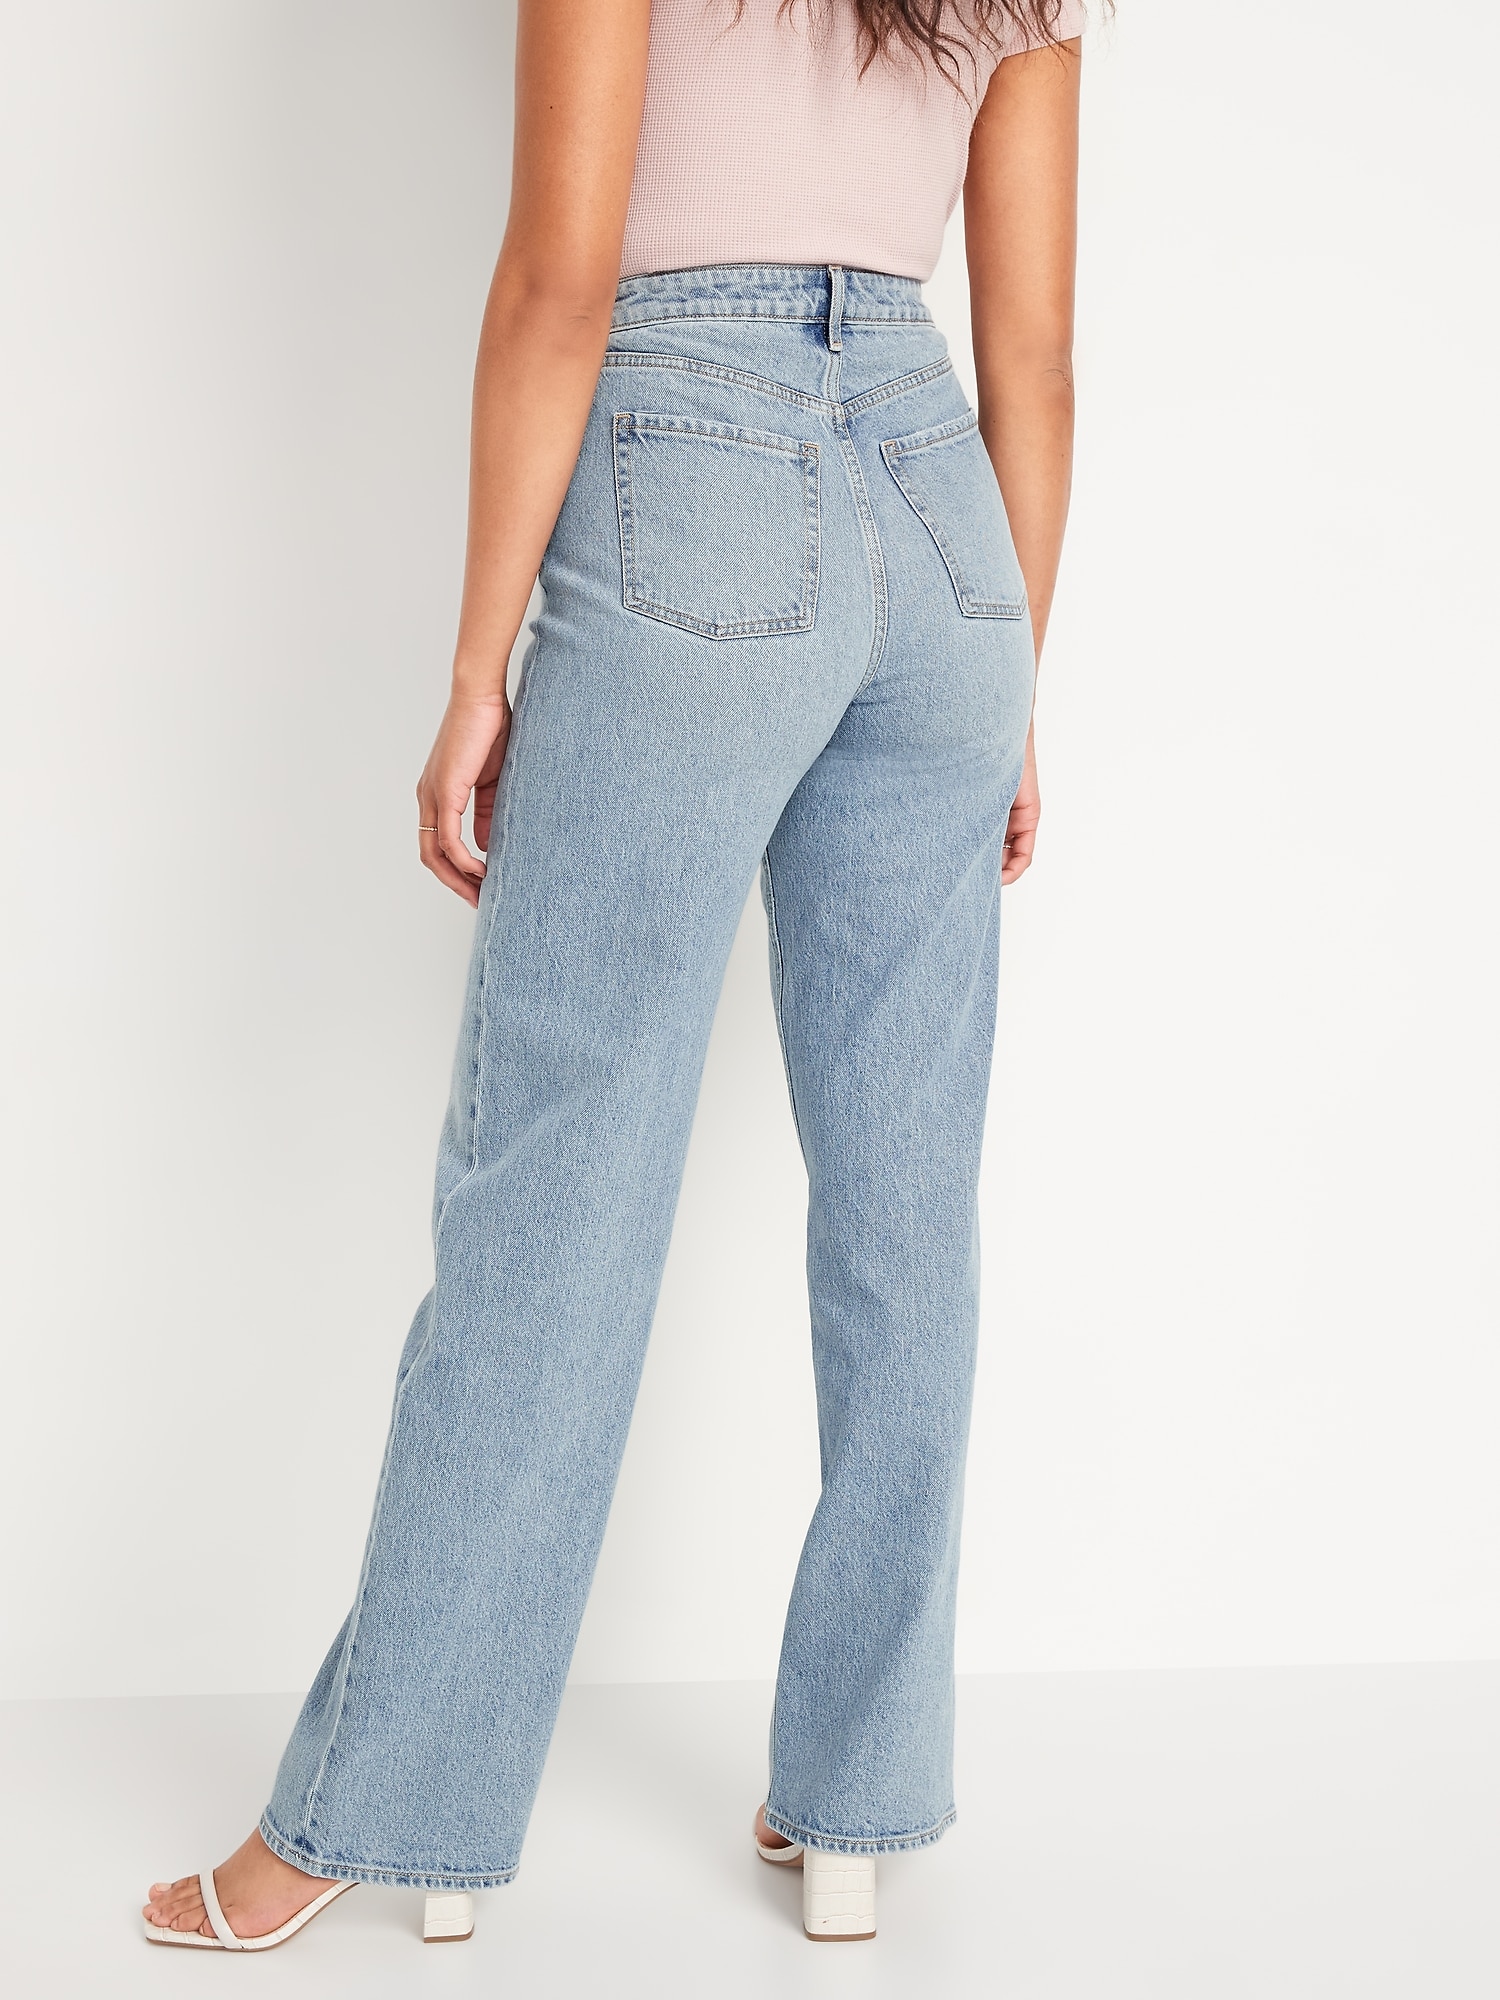 Extra High-Waisted Ripped Wide-Leg Jeans for Women | Old Navy